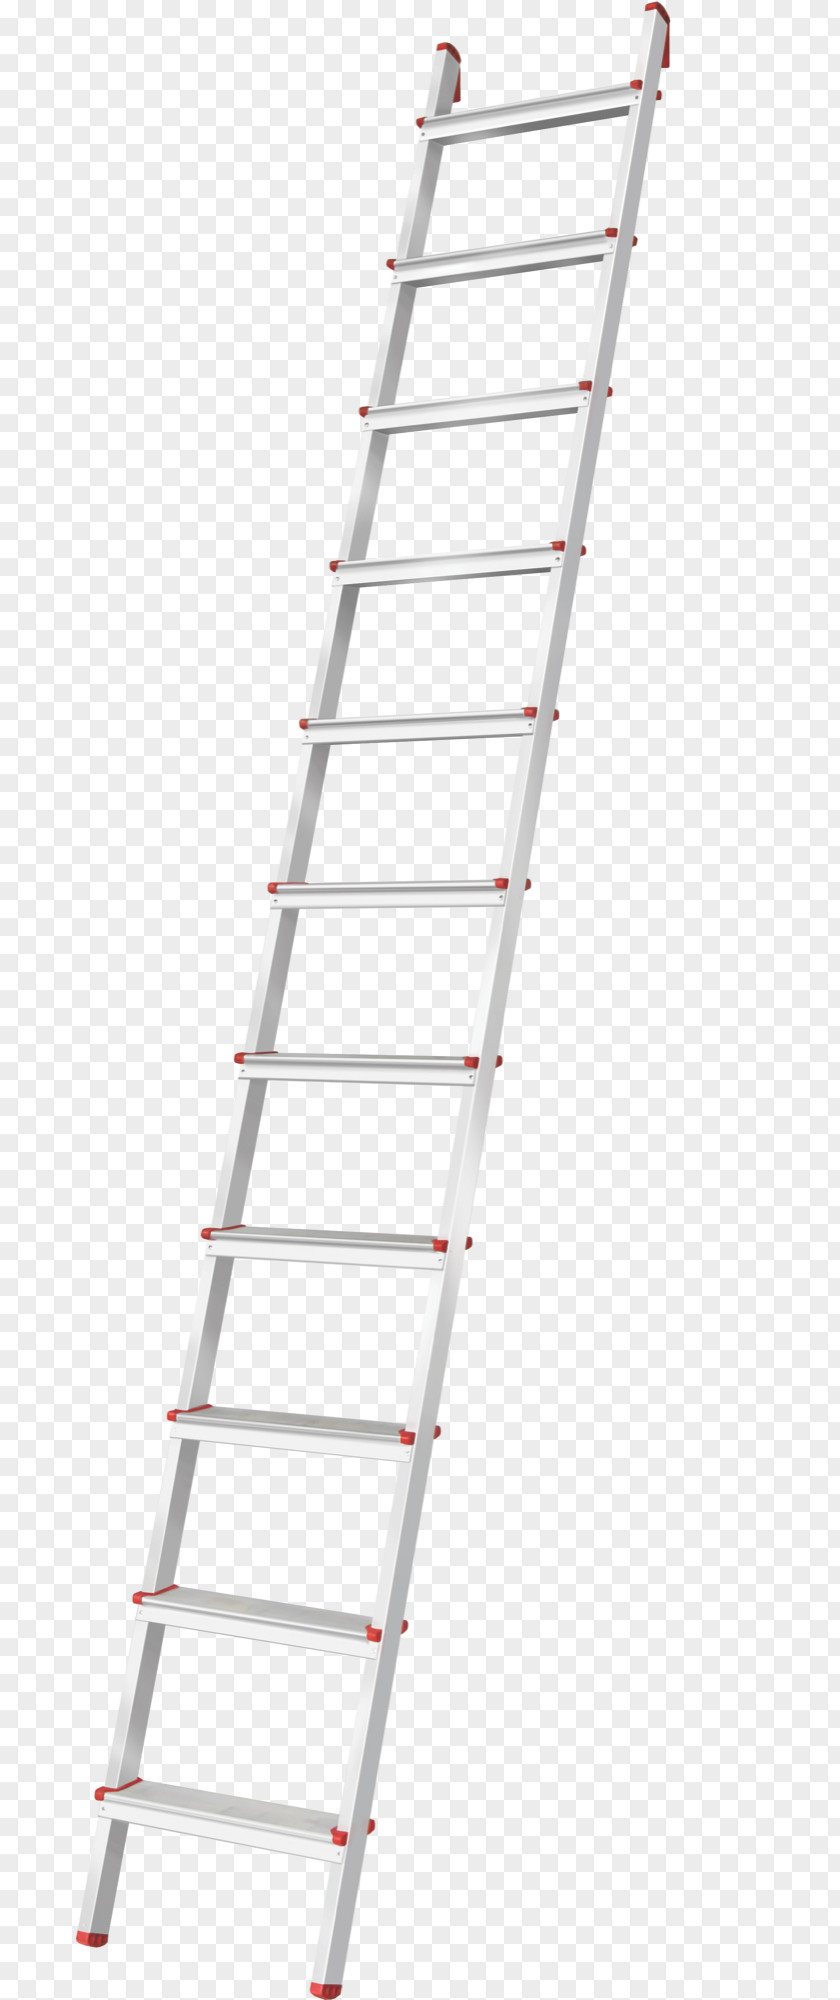 Ladder Hailo Combi 3 Section Capacity 150kg Rungs And Stairs Height Tool PNG